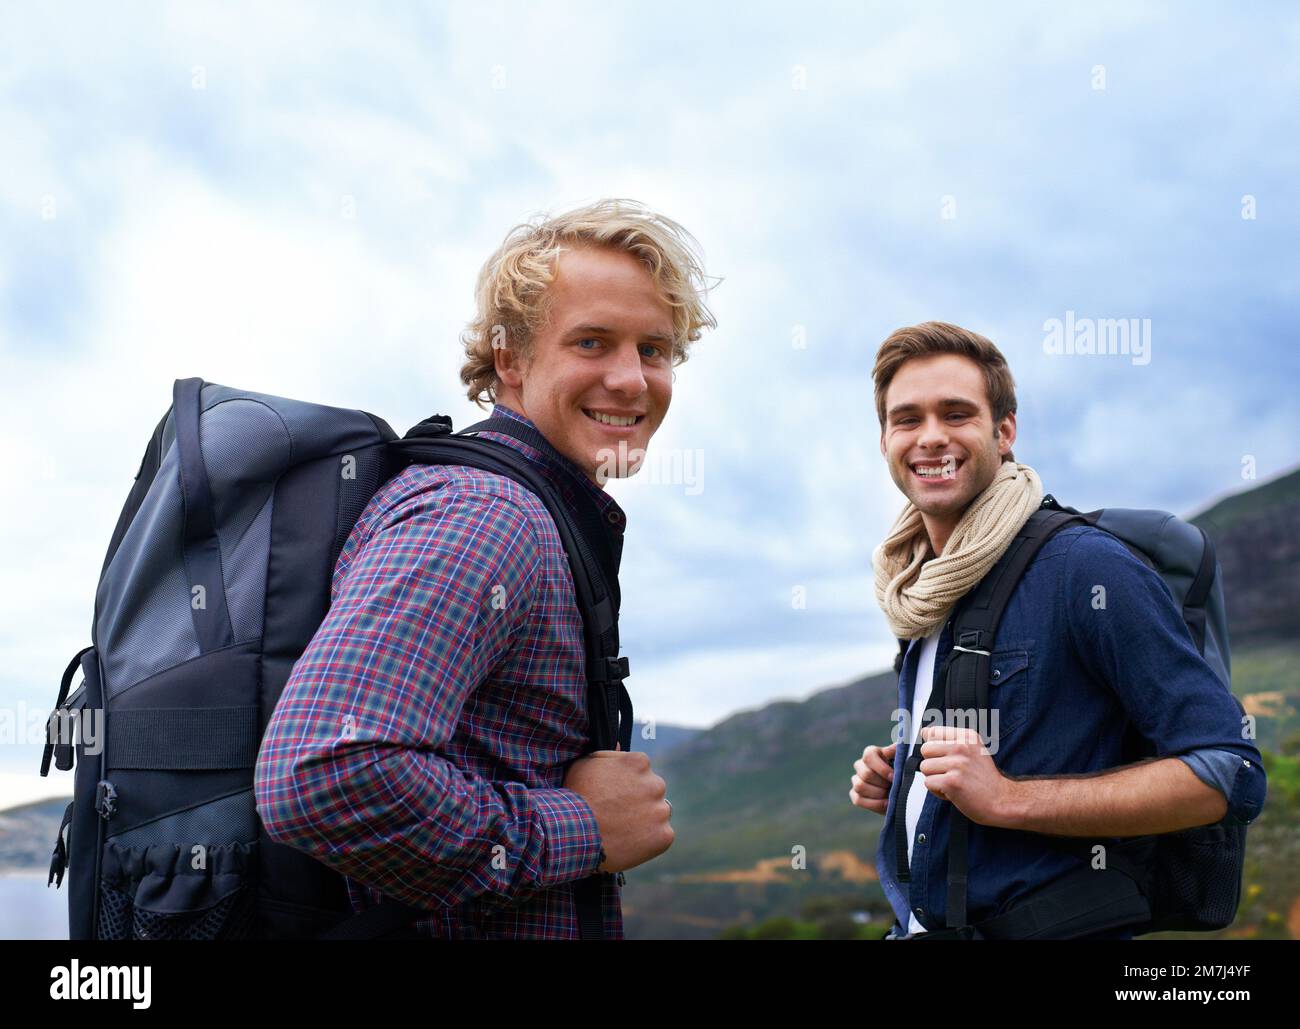 Two men of adventure. Two male backpackers exploring nature together. Stock Photo